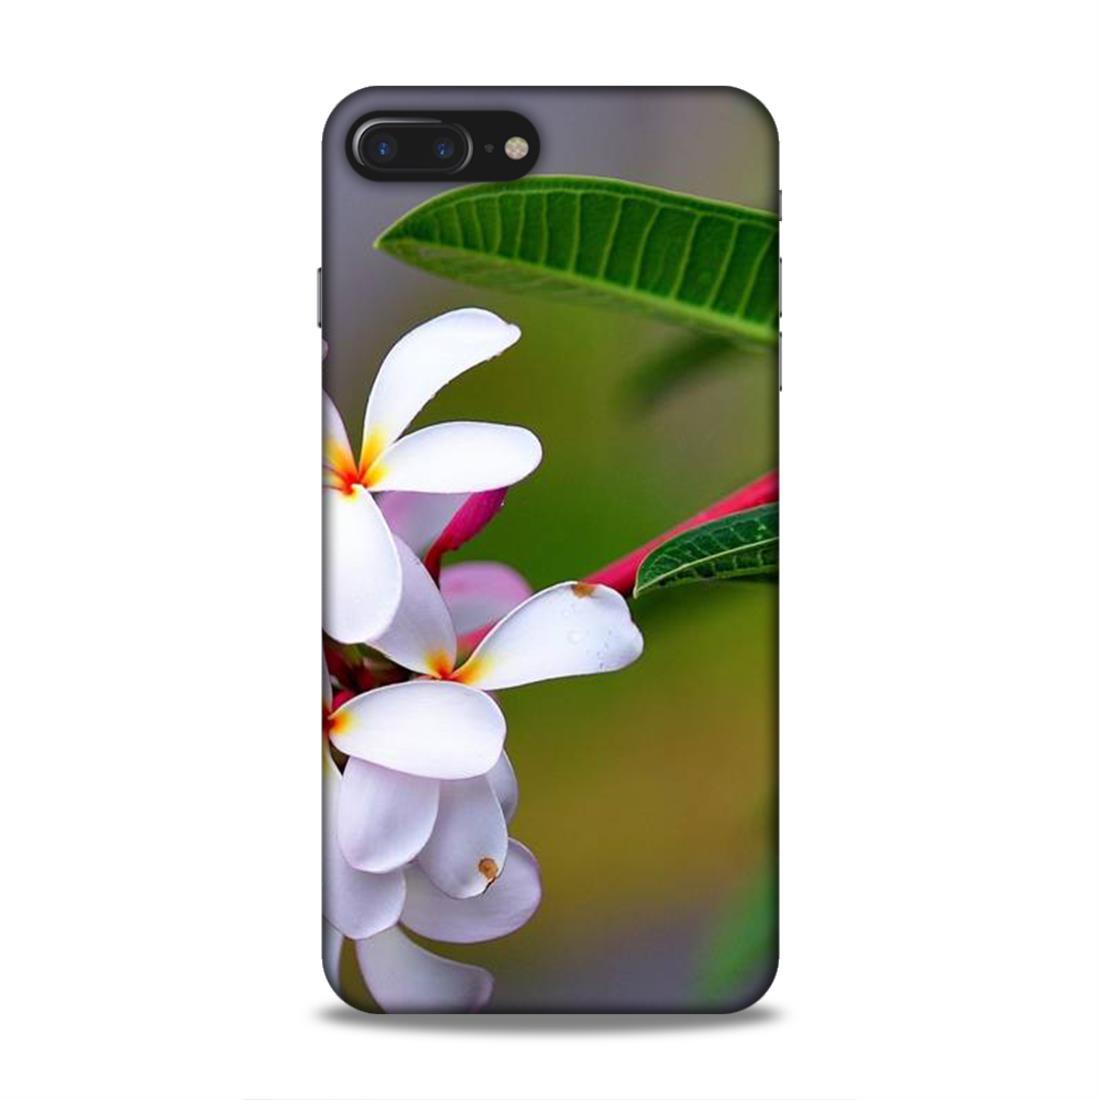 Natural White Flower iPhone 8 Plus Mobile Cover Case